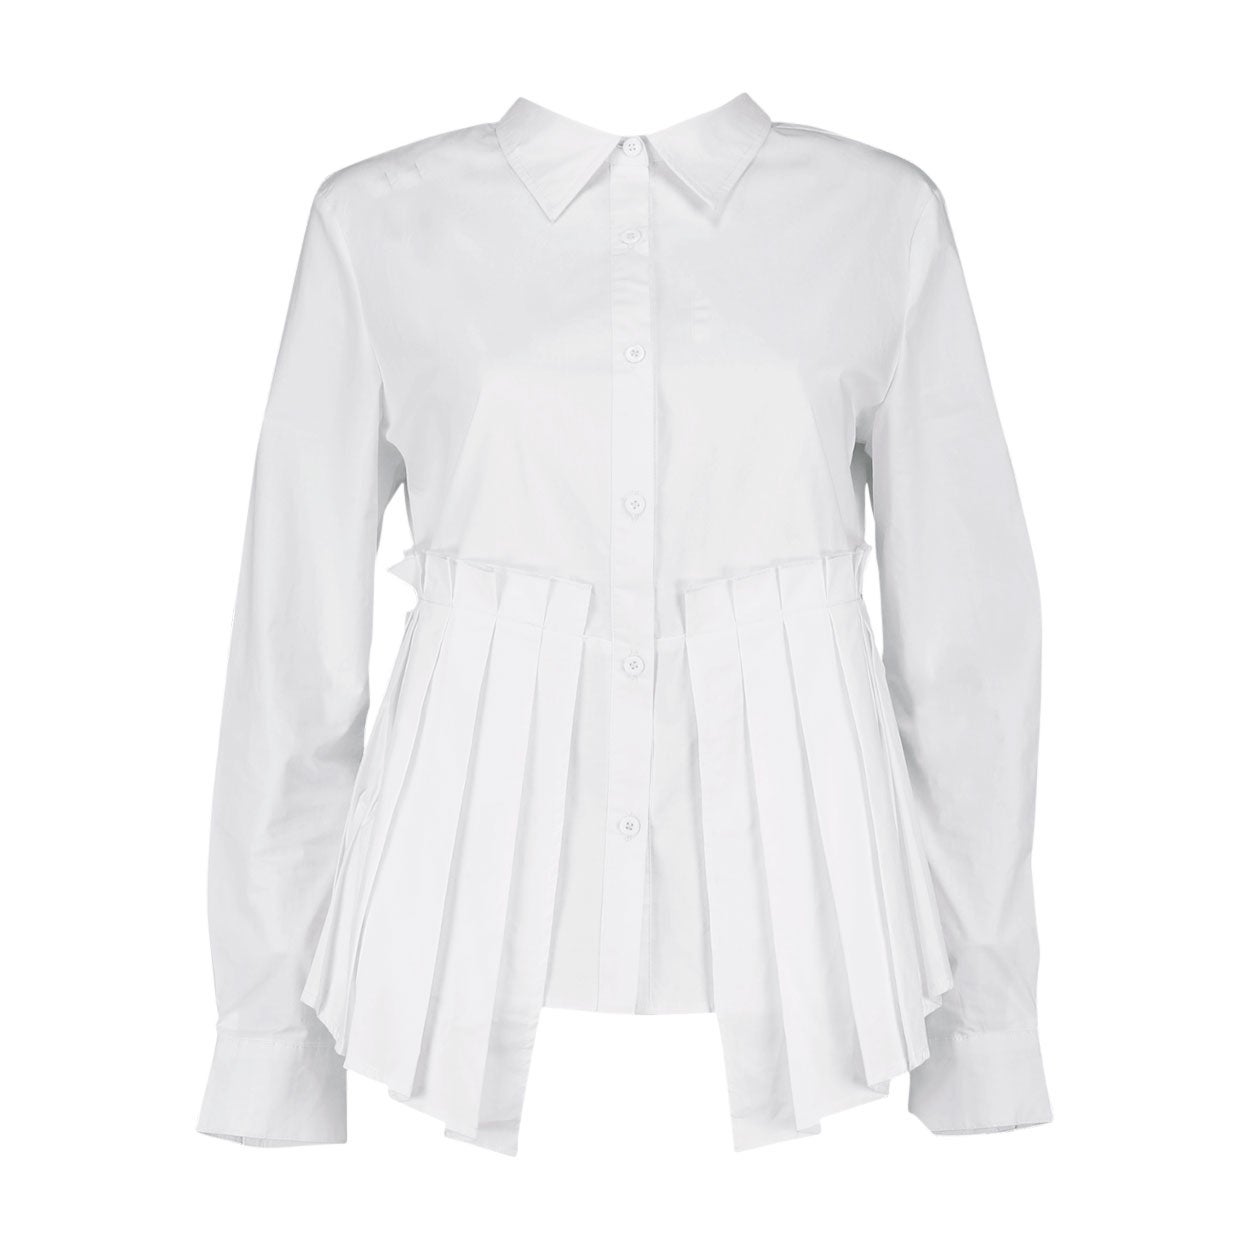 The Reworked Shirts You Need in Your Wardrobe This Spring | Essence